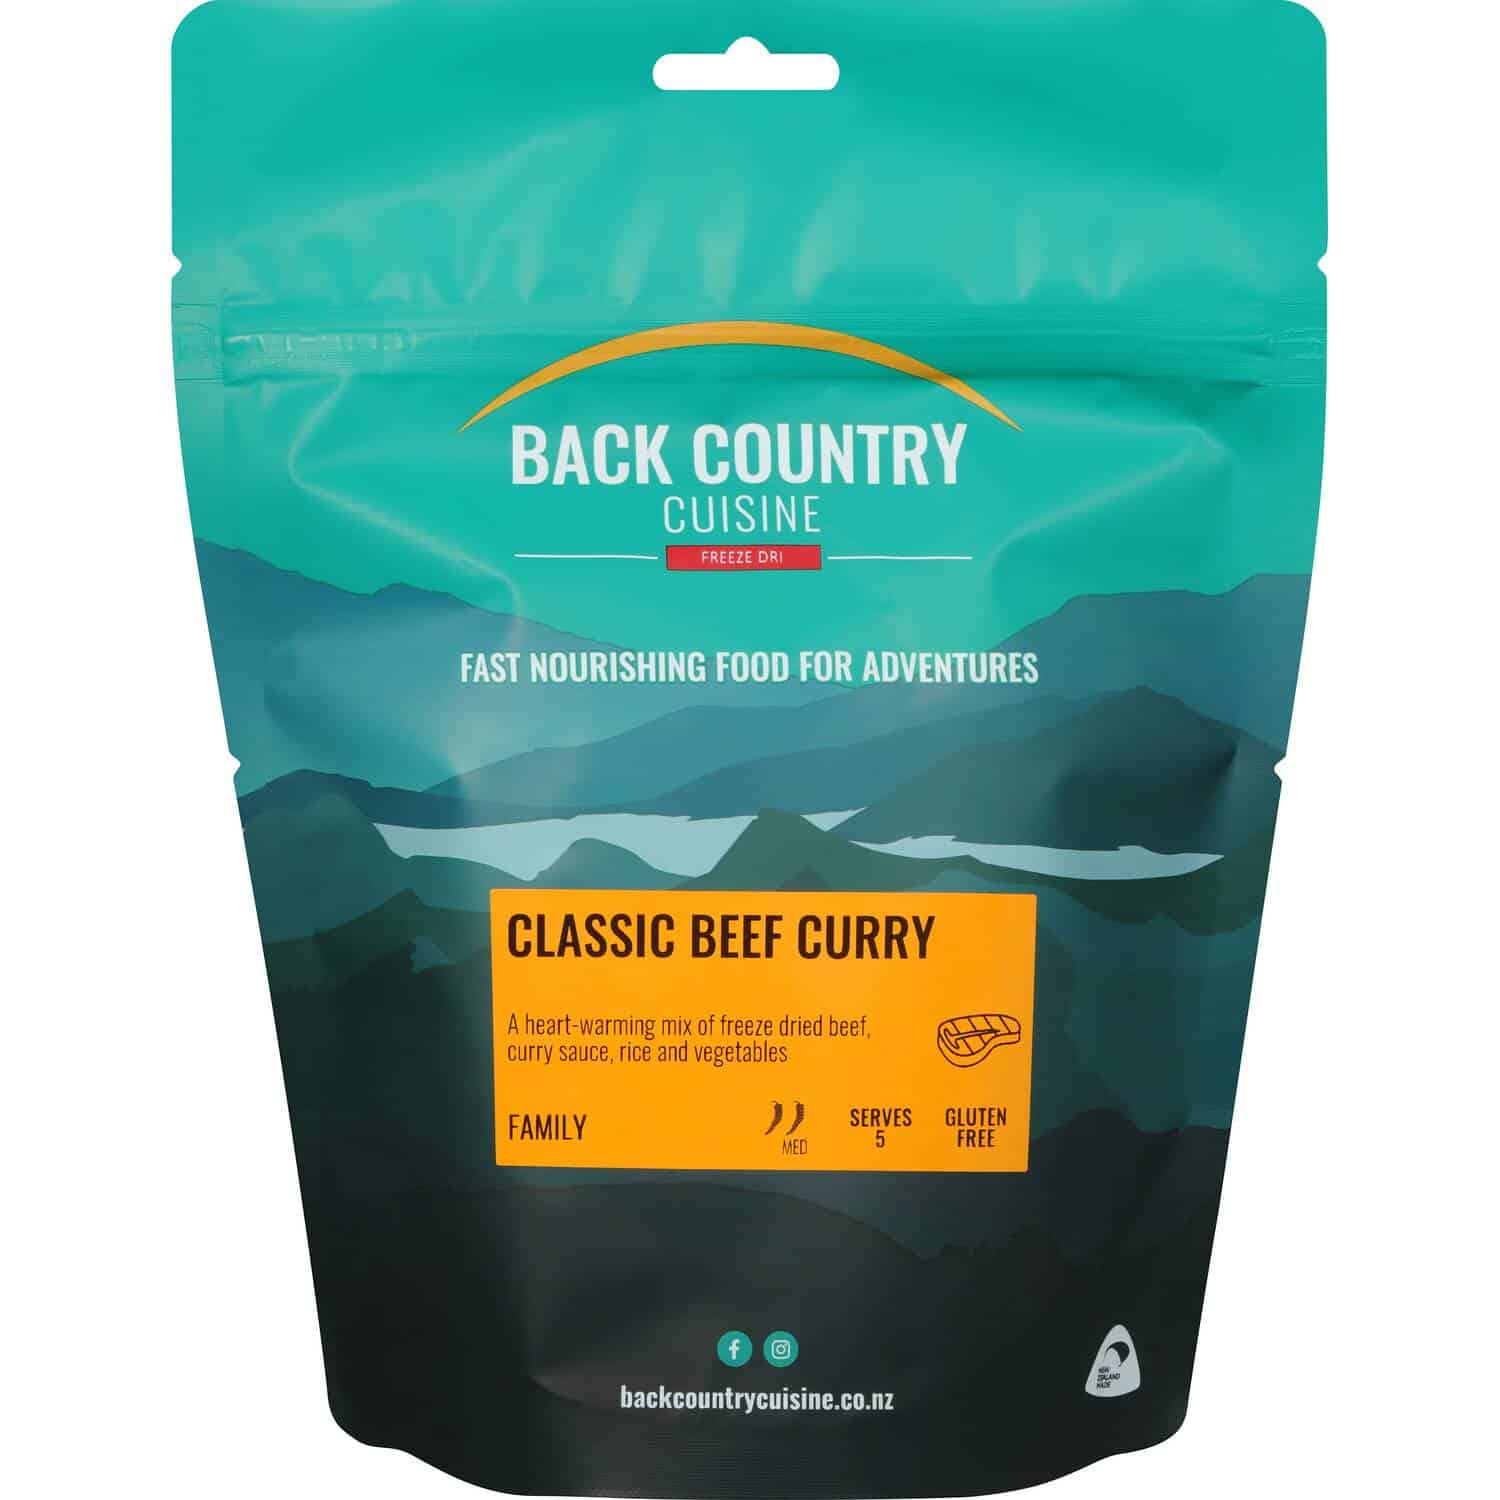 Back Country Cuisine Classic Beef Curry Family - Tramping Food and Accessories sold by Venture Outdoors NZ